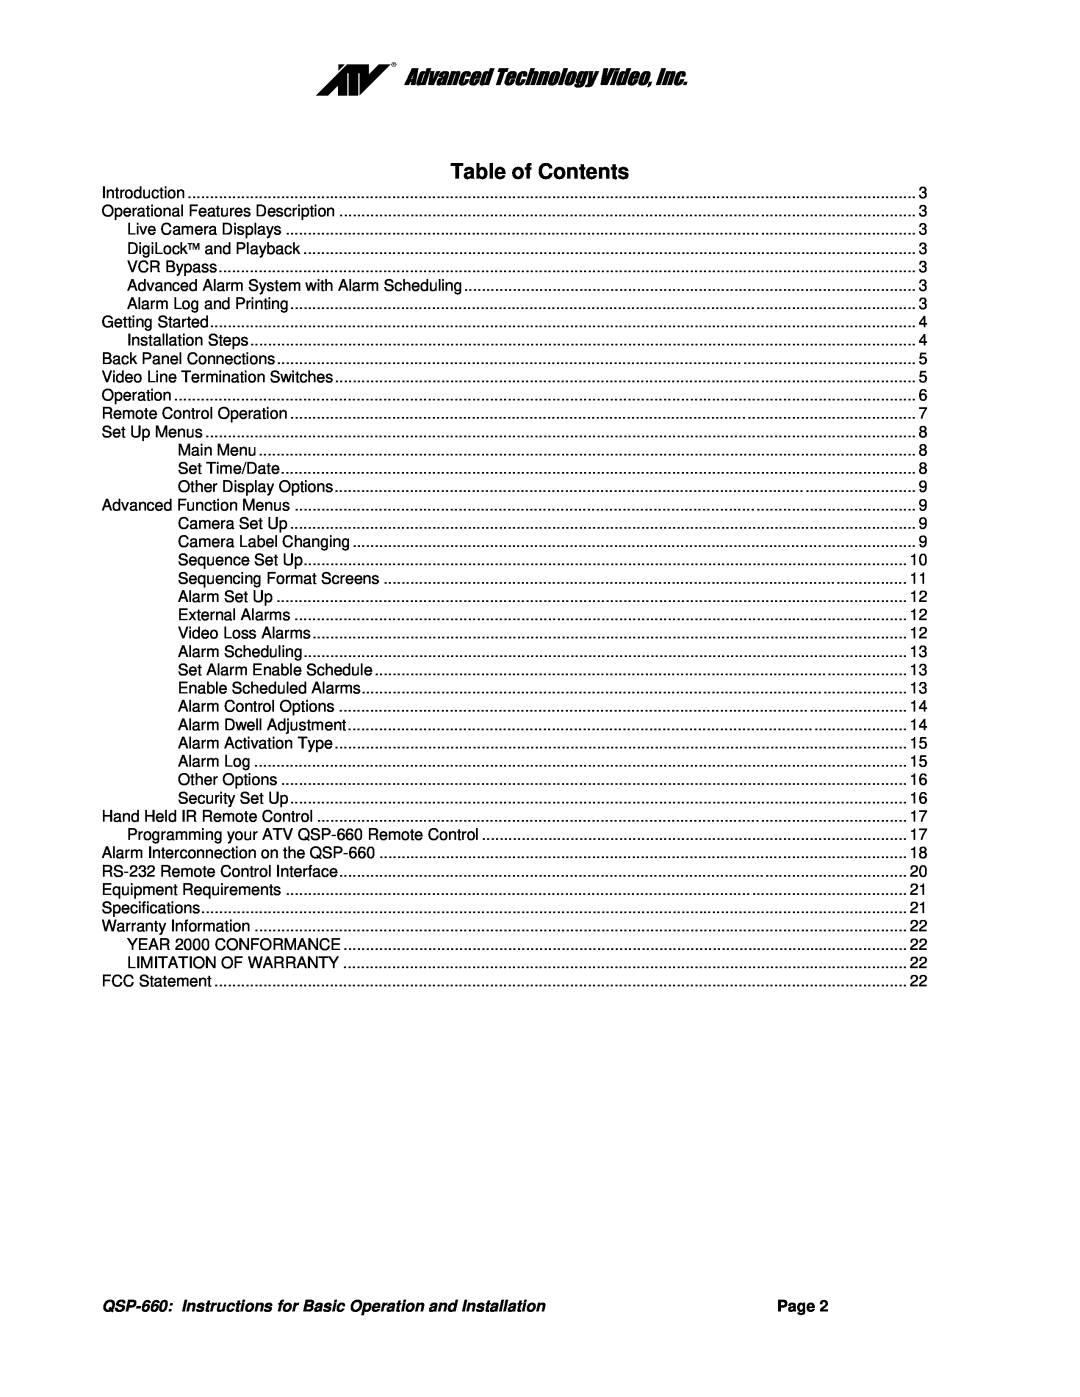 Advanced Global Technology QSP-660 manual $GYDQFHG7HFKQRORJ\9LGHR,QF, Table of Contents, Page 